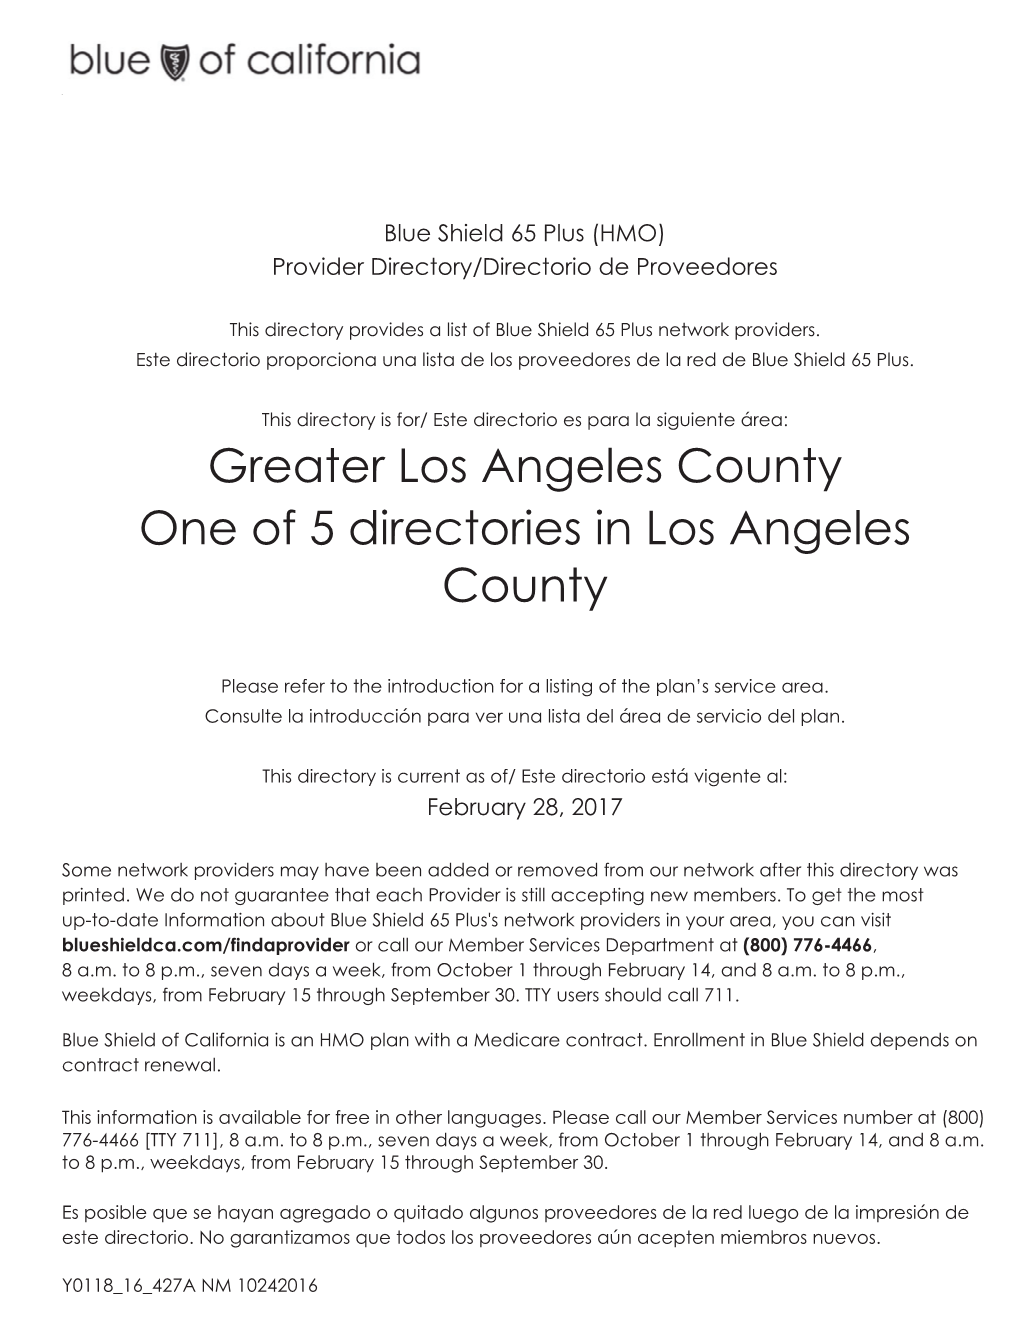 Greater Los Angeles County One of 5 Directories in Los Angeles County